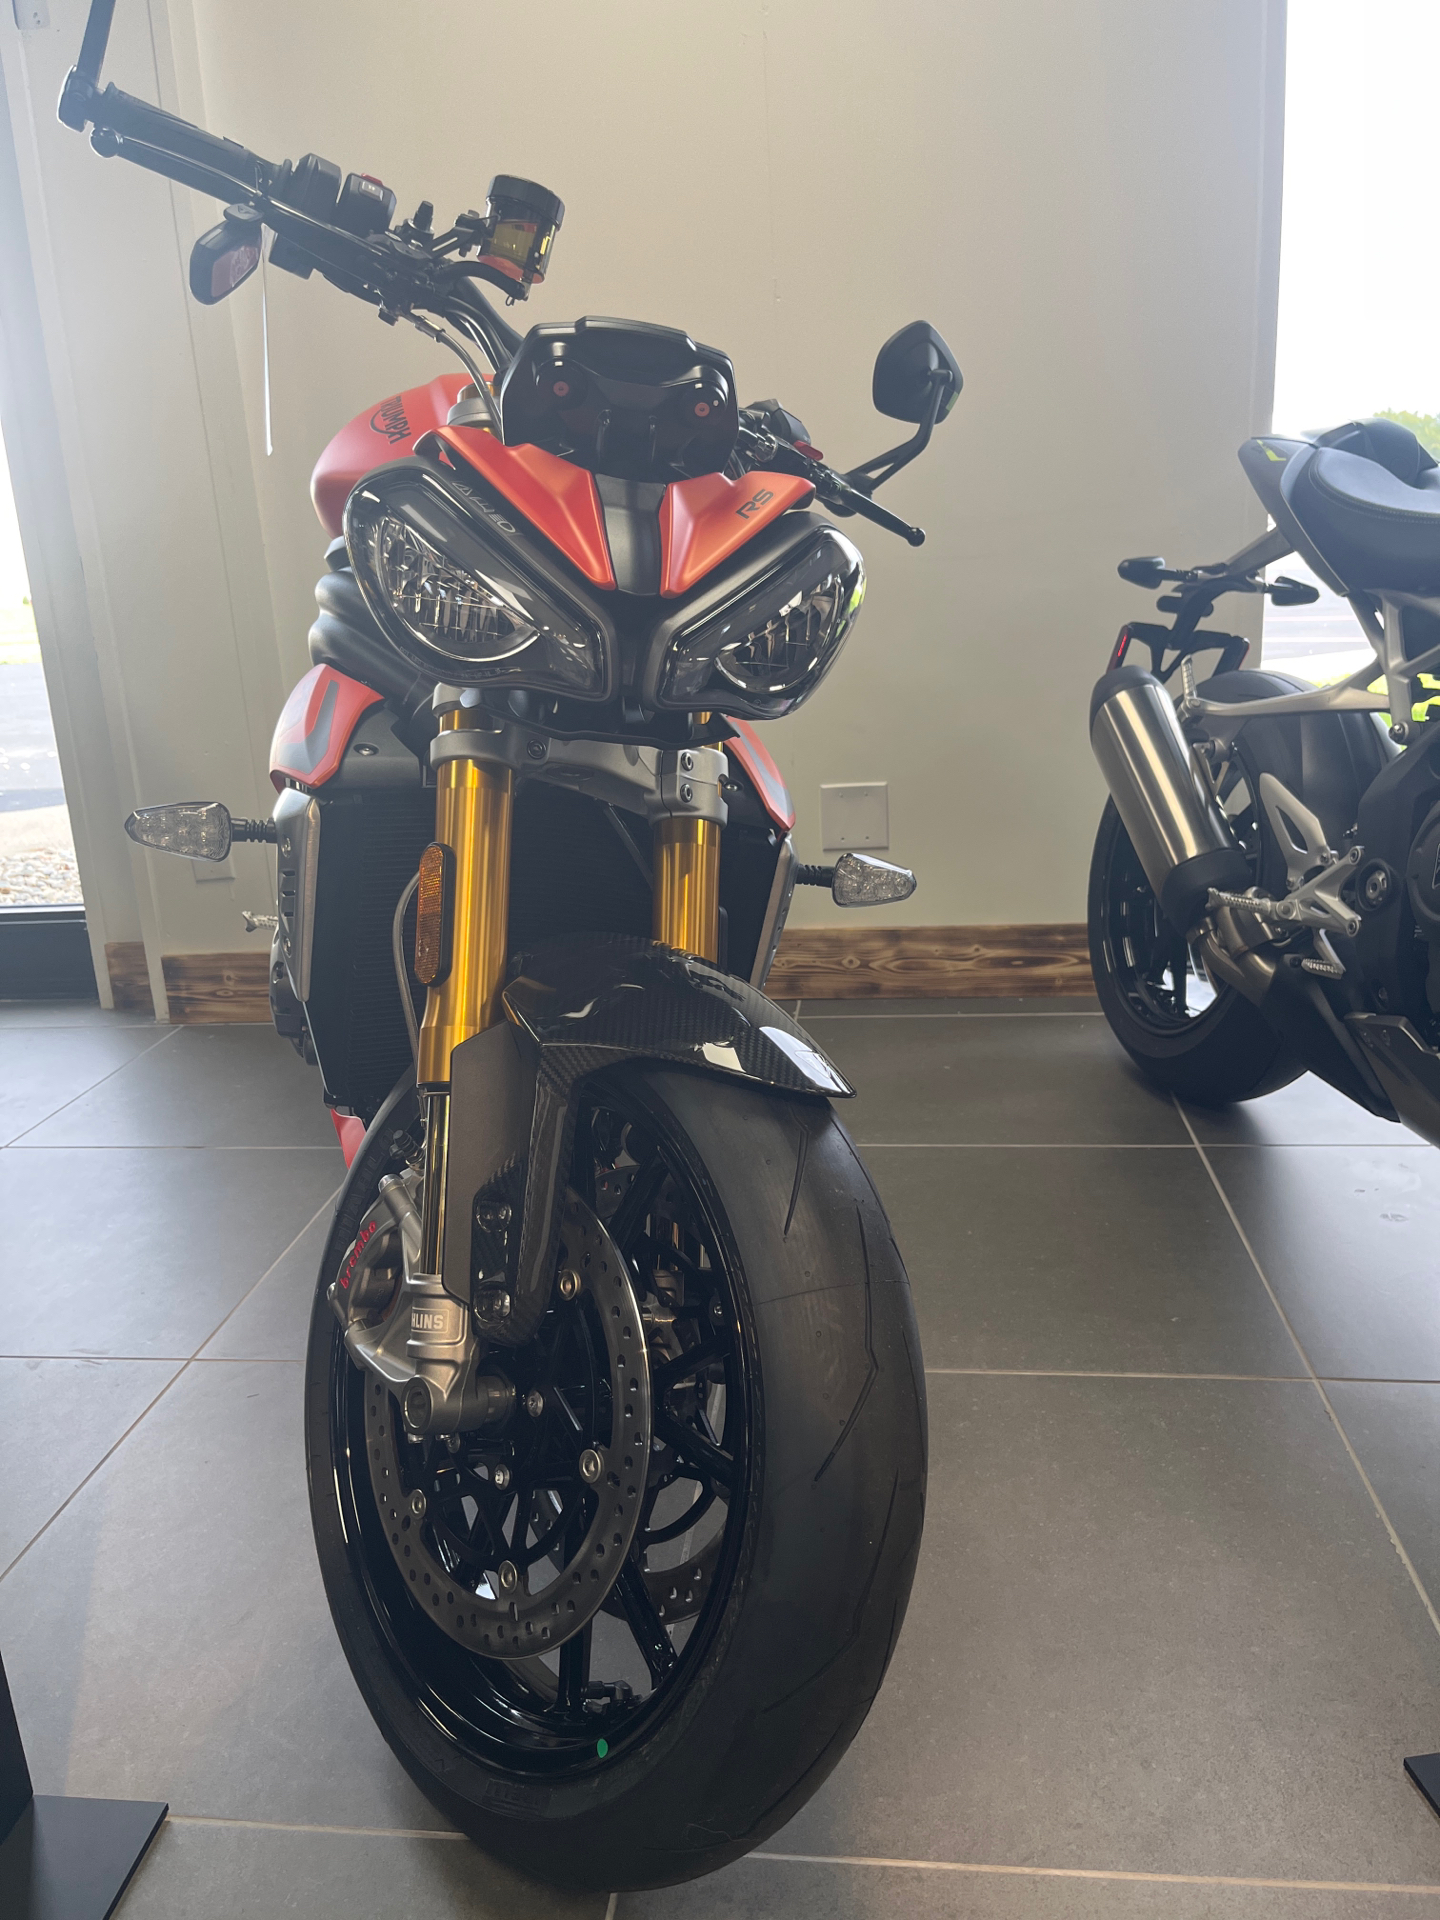 2023 Triumph Speed Triple 1200 RS in Fort Wayne, Indiana - Photo 2